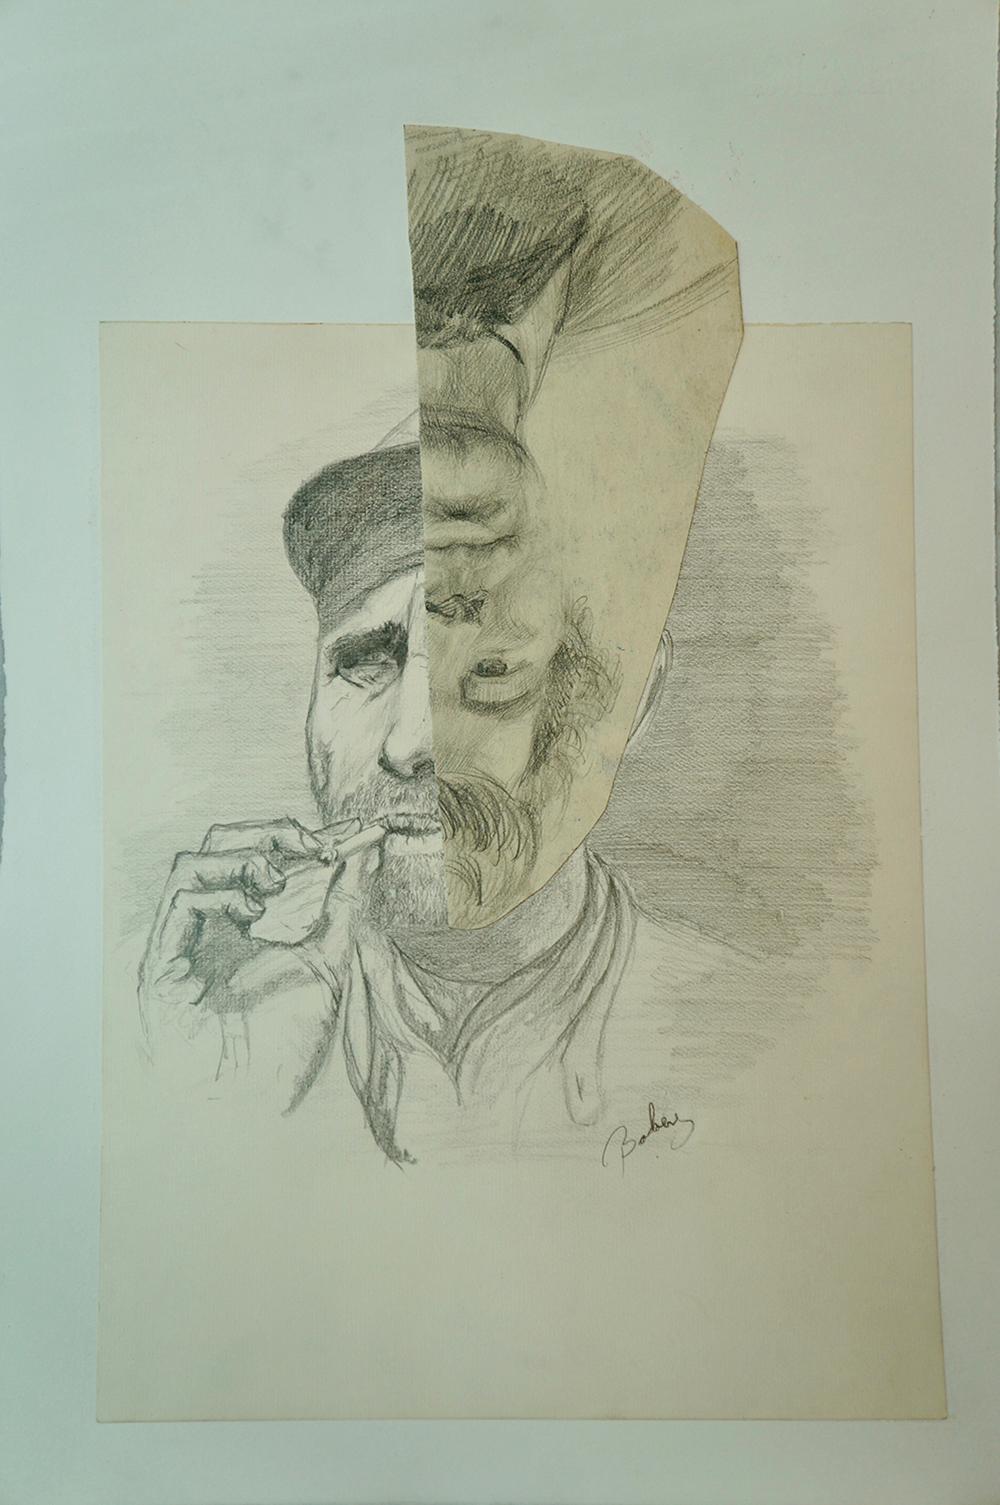 "Smoker", contemporary, pencil on paper, portrait, collage, drawing